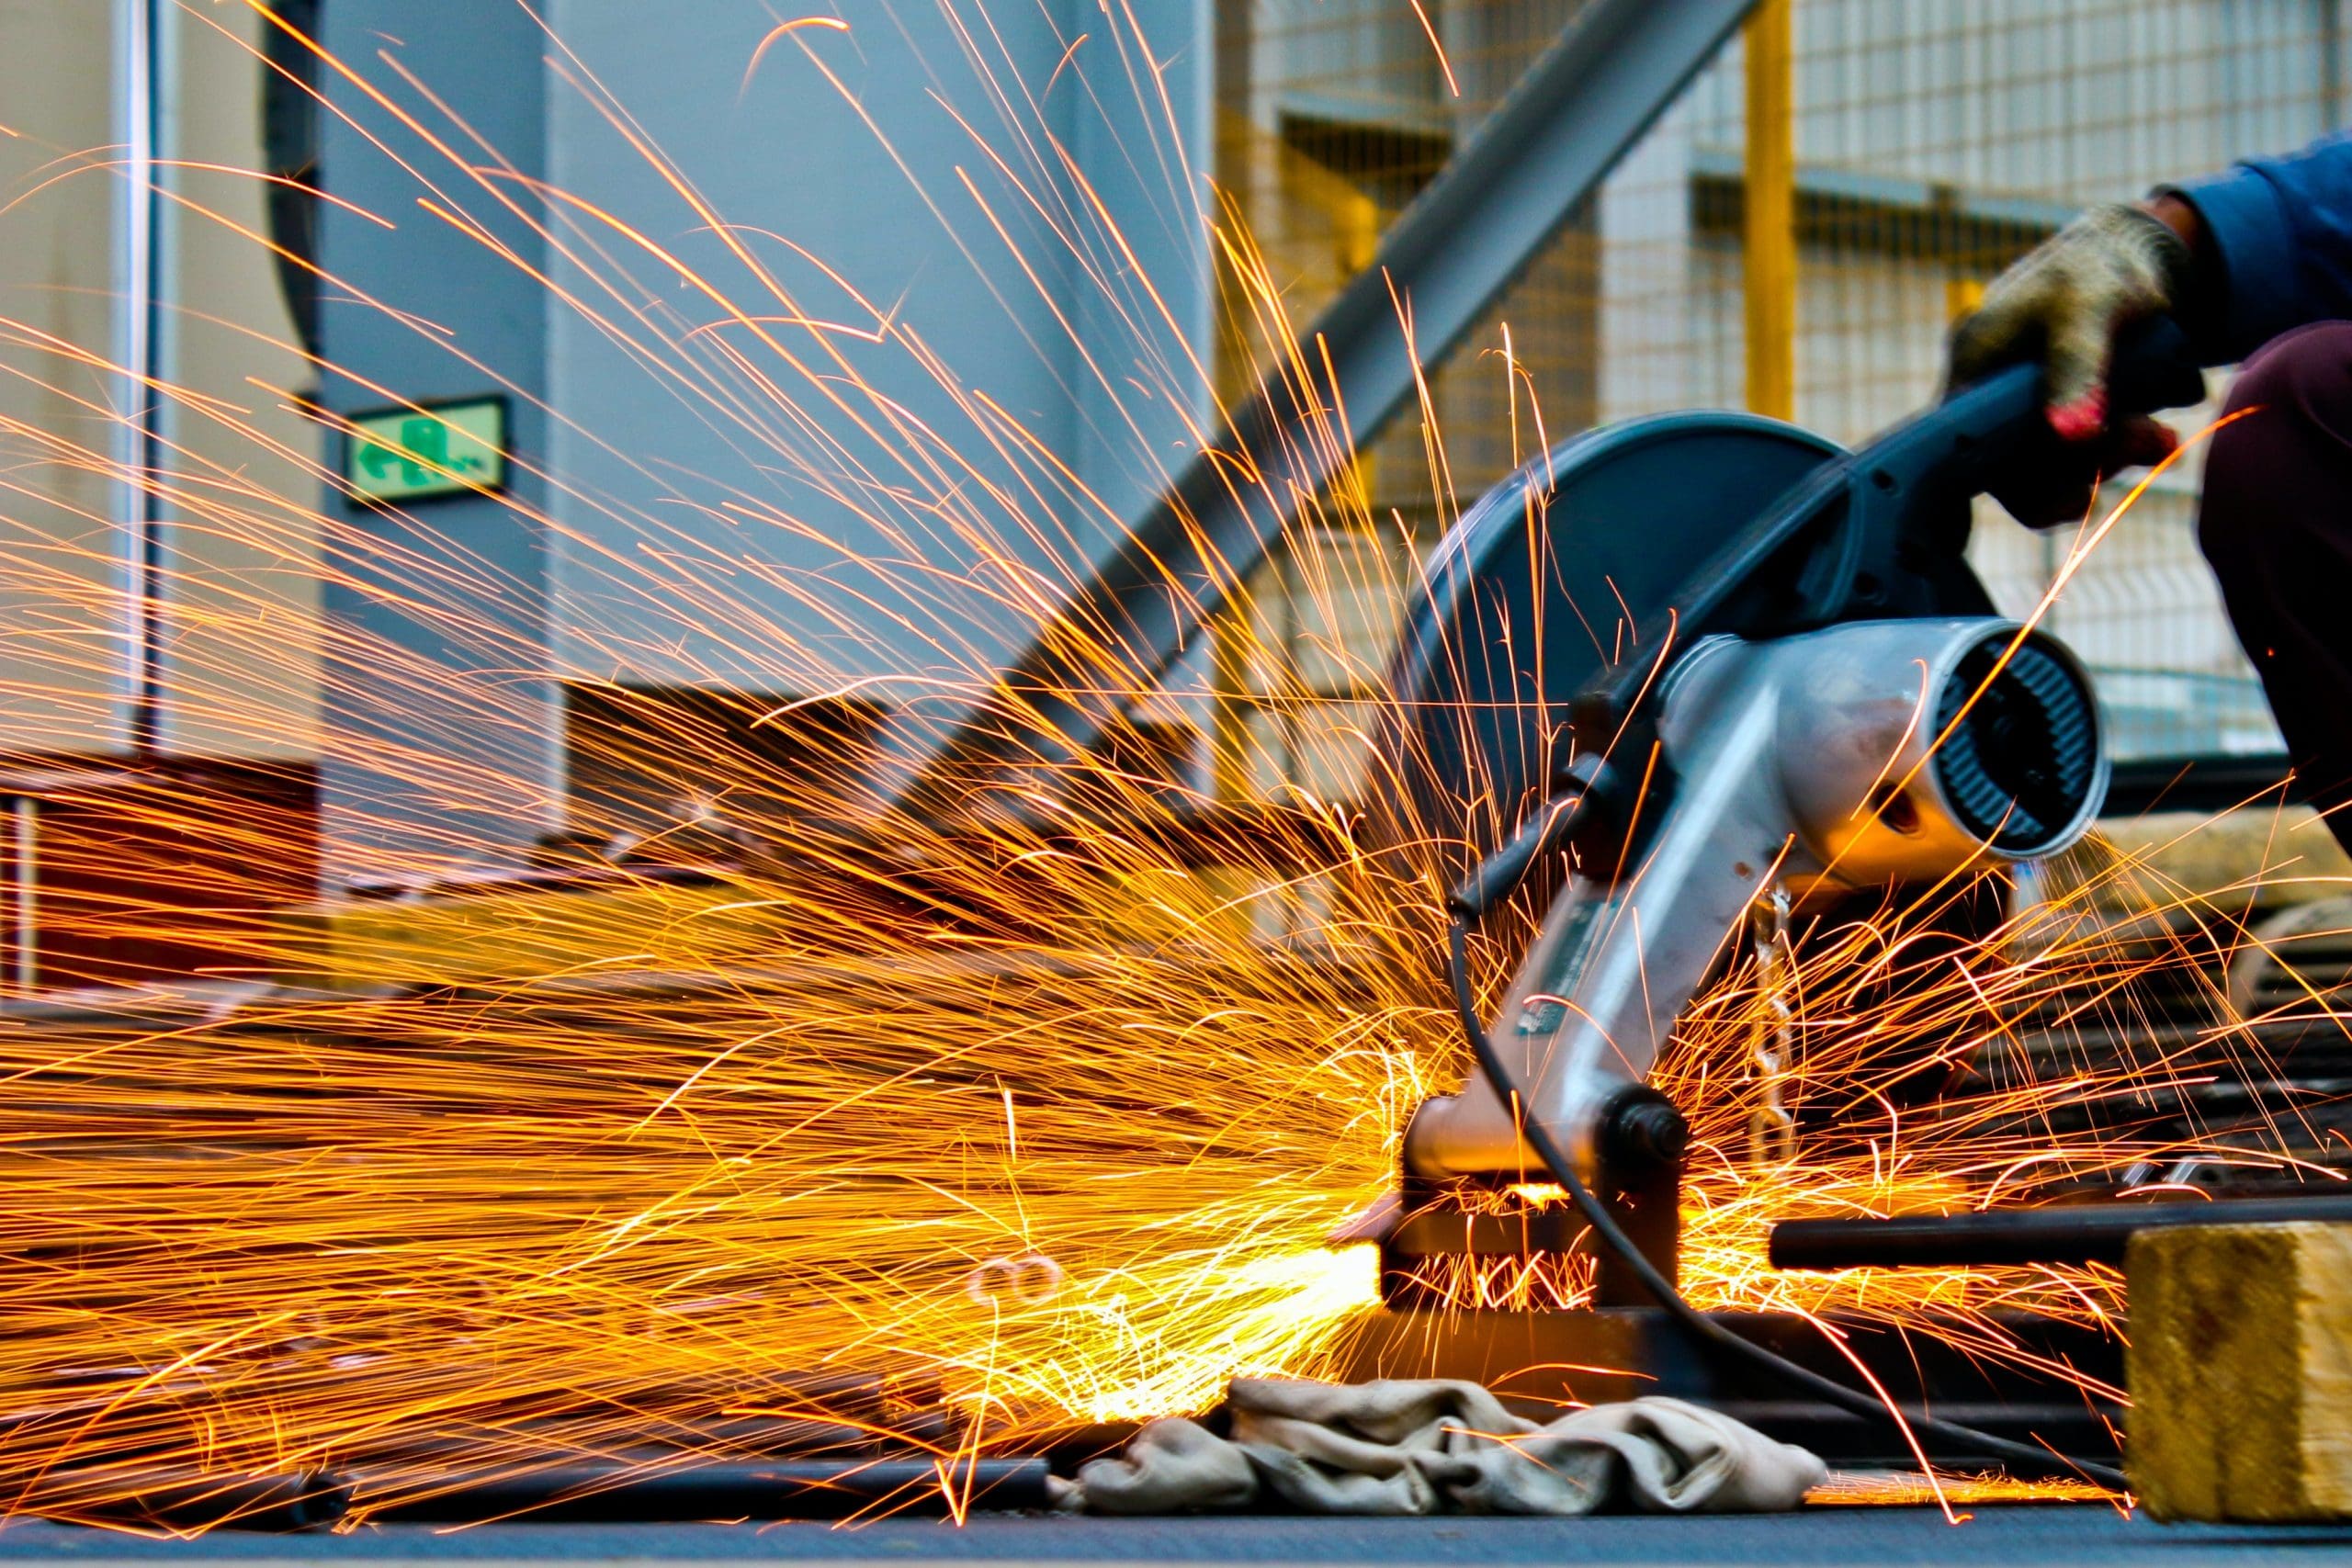 sparks flying from saw in services and industry